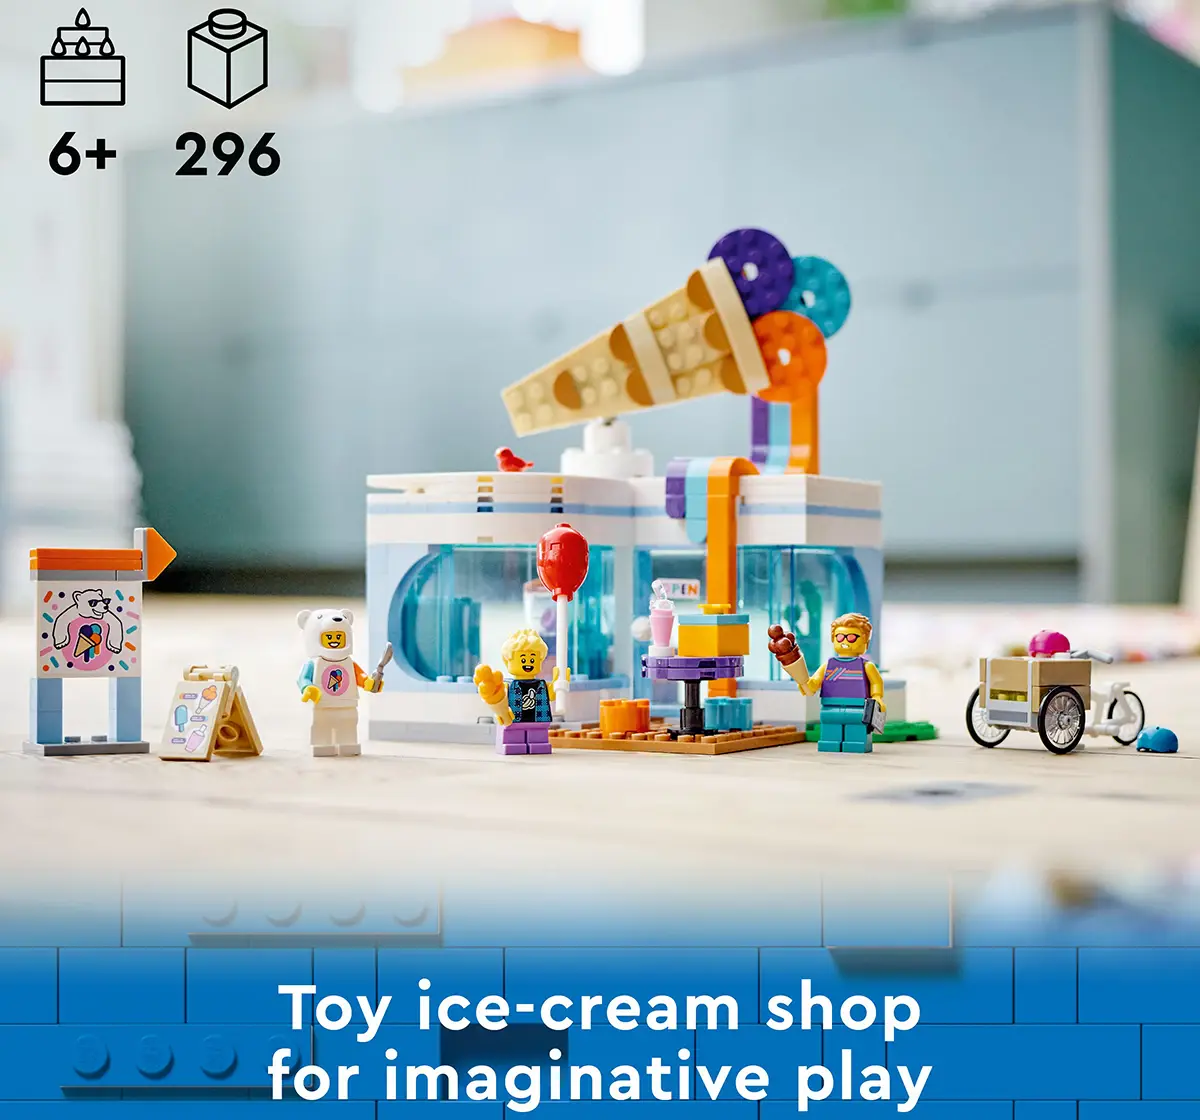 Lego City Ice-Cream Shop 60363 Building Toy Set For Kids Aged 6+ (296 Pieces), 6Y+